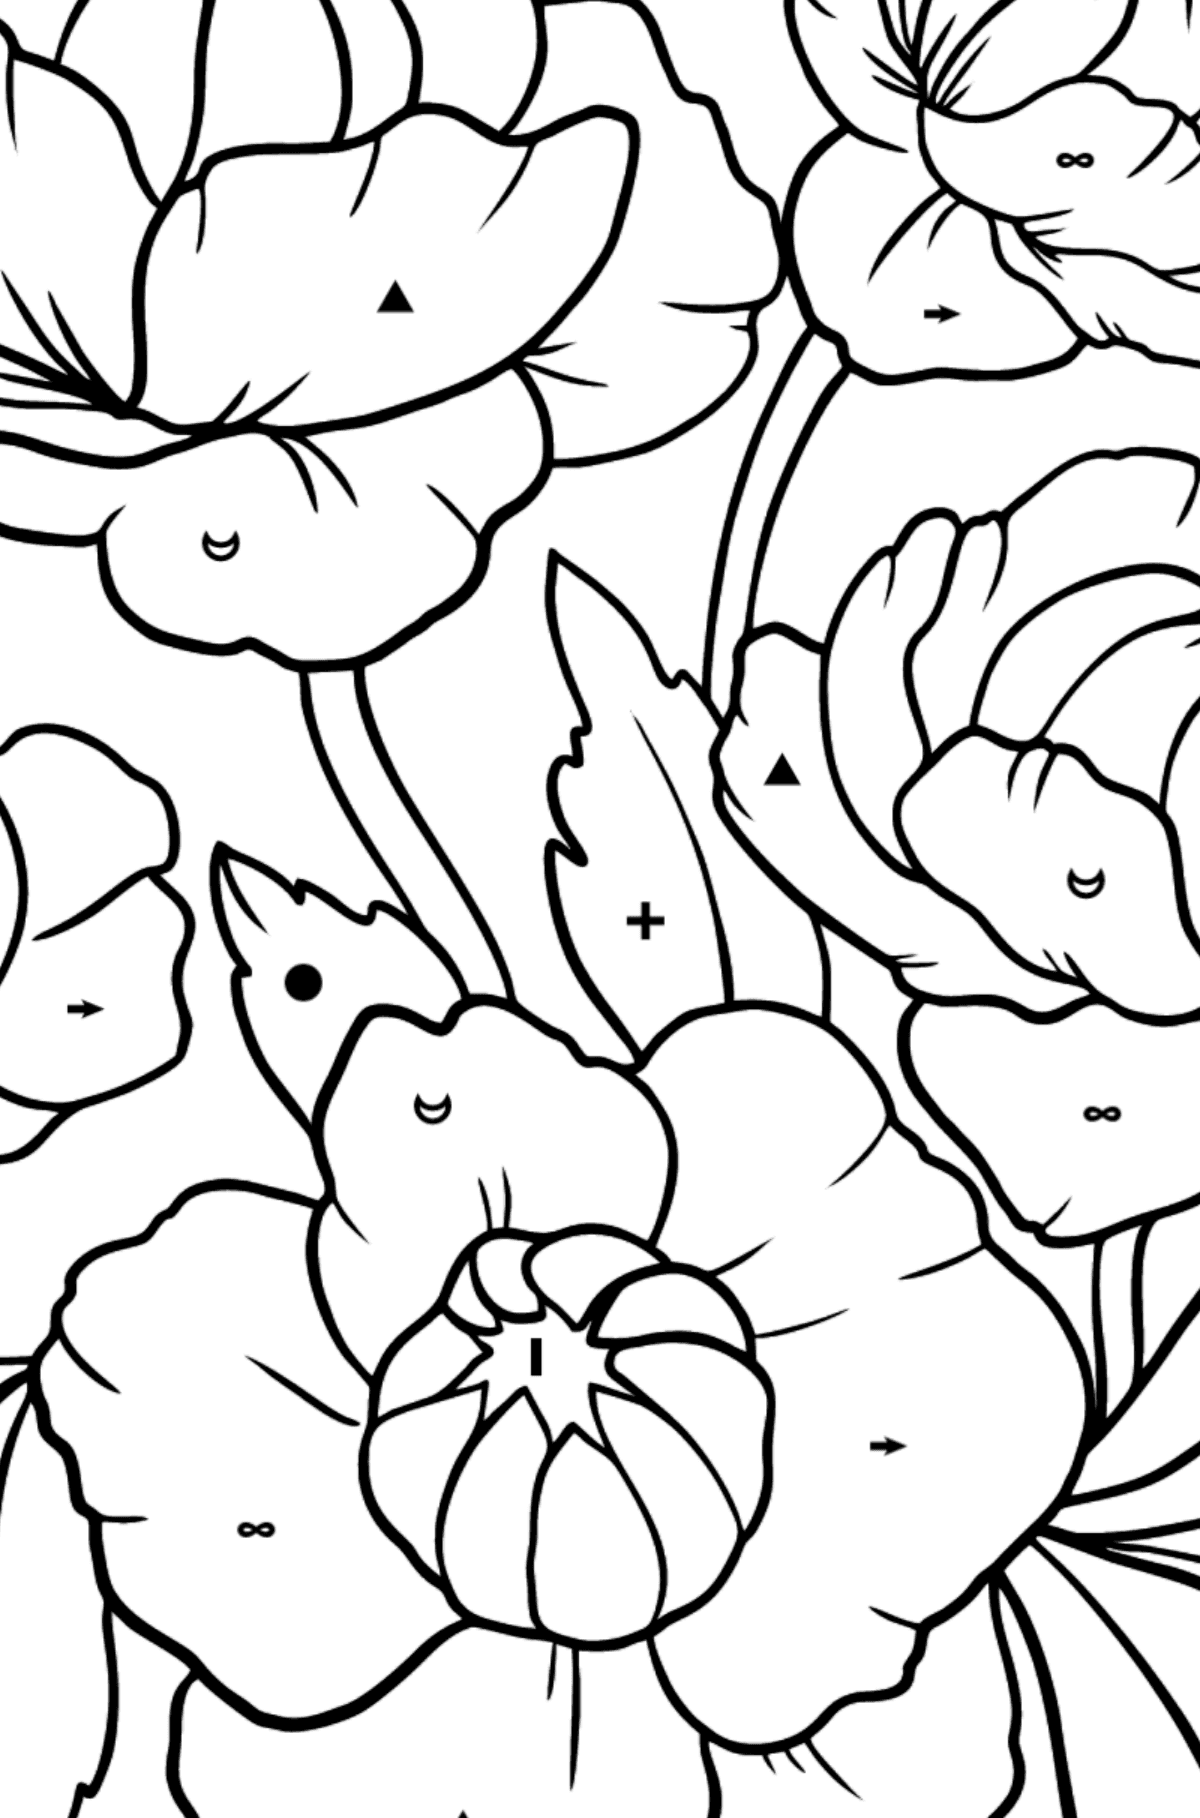 Flower Coloring Page - A Pink Globeflower - Coloring by Symbols for Kids